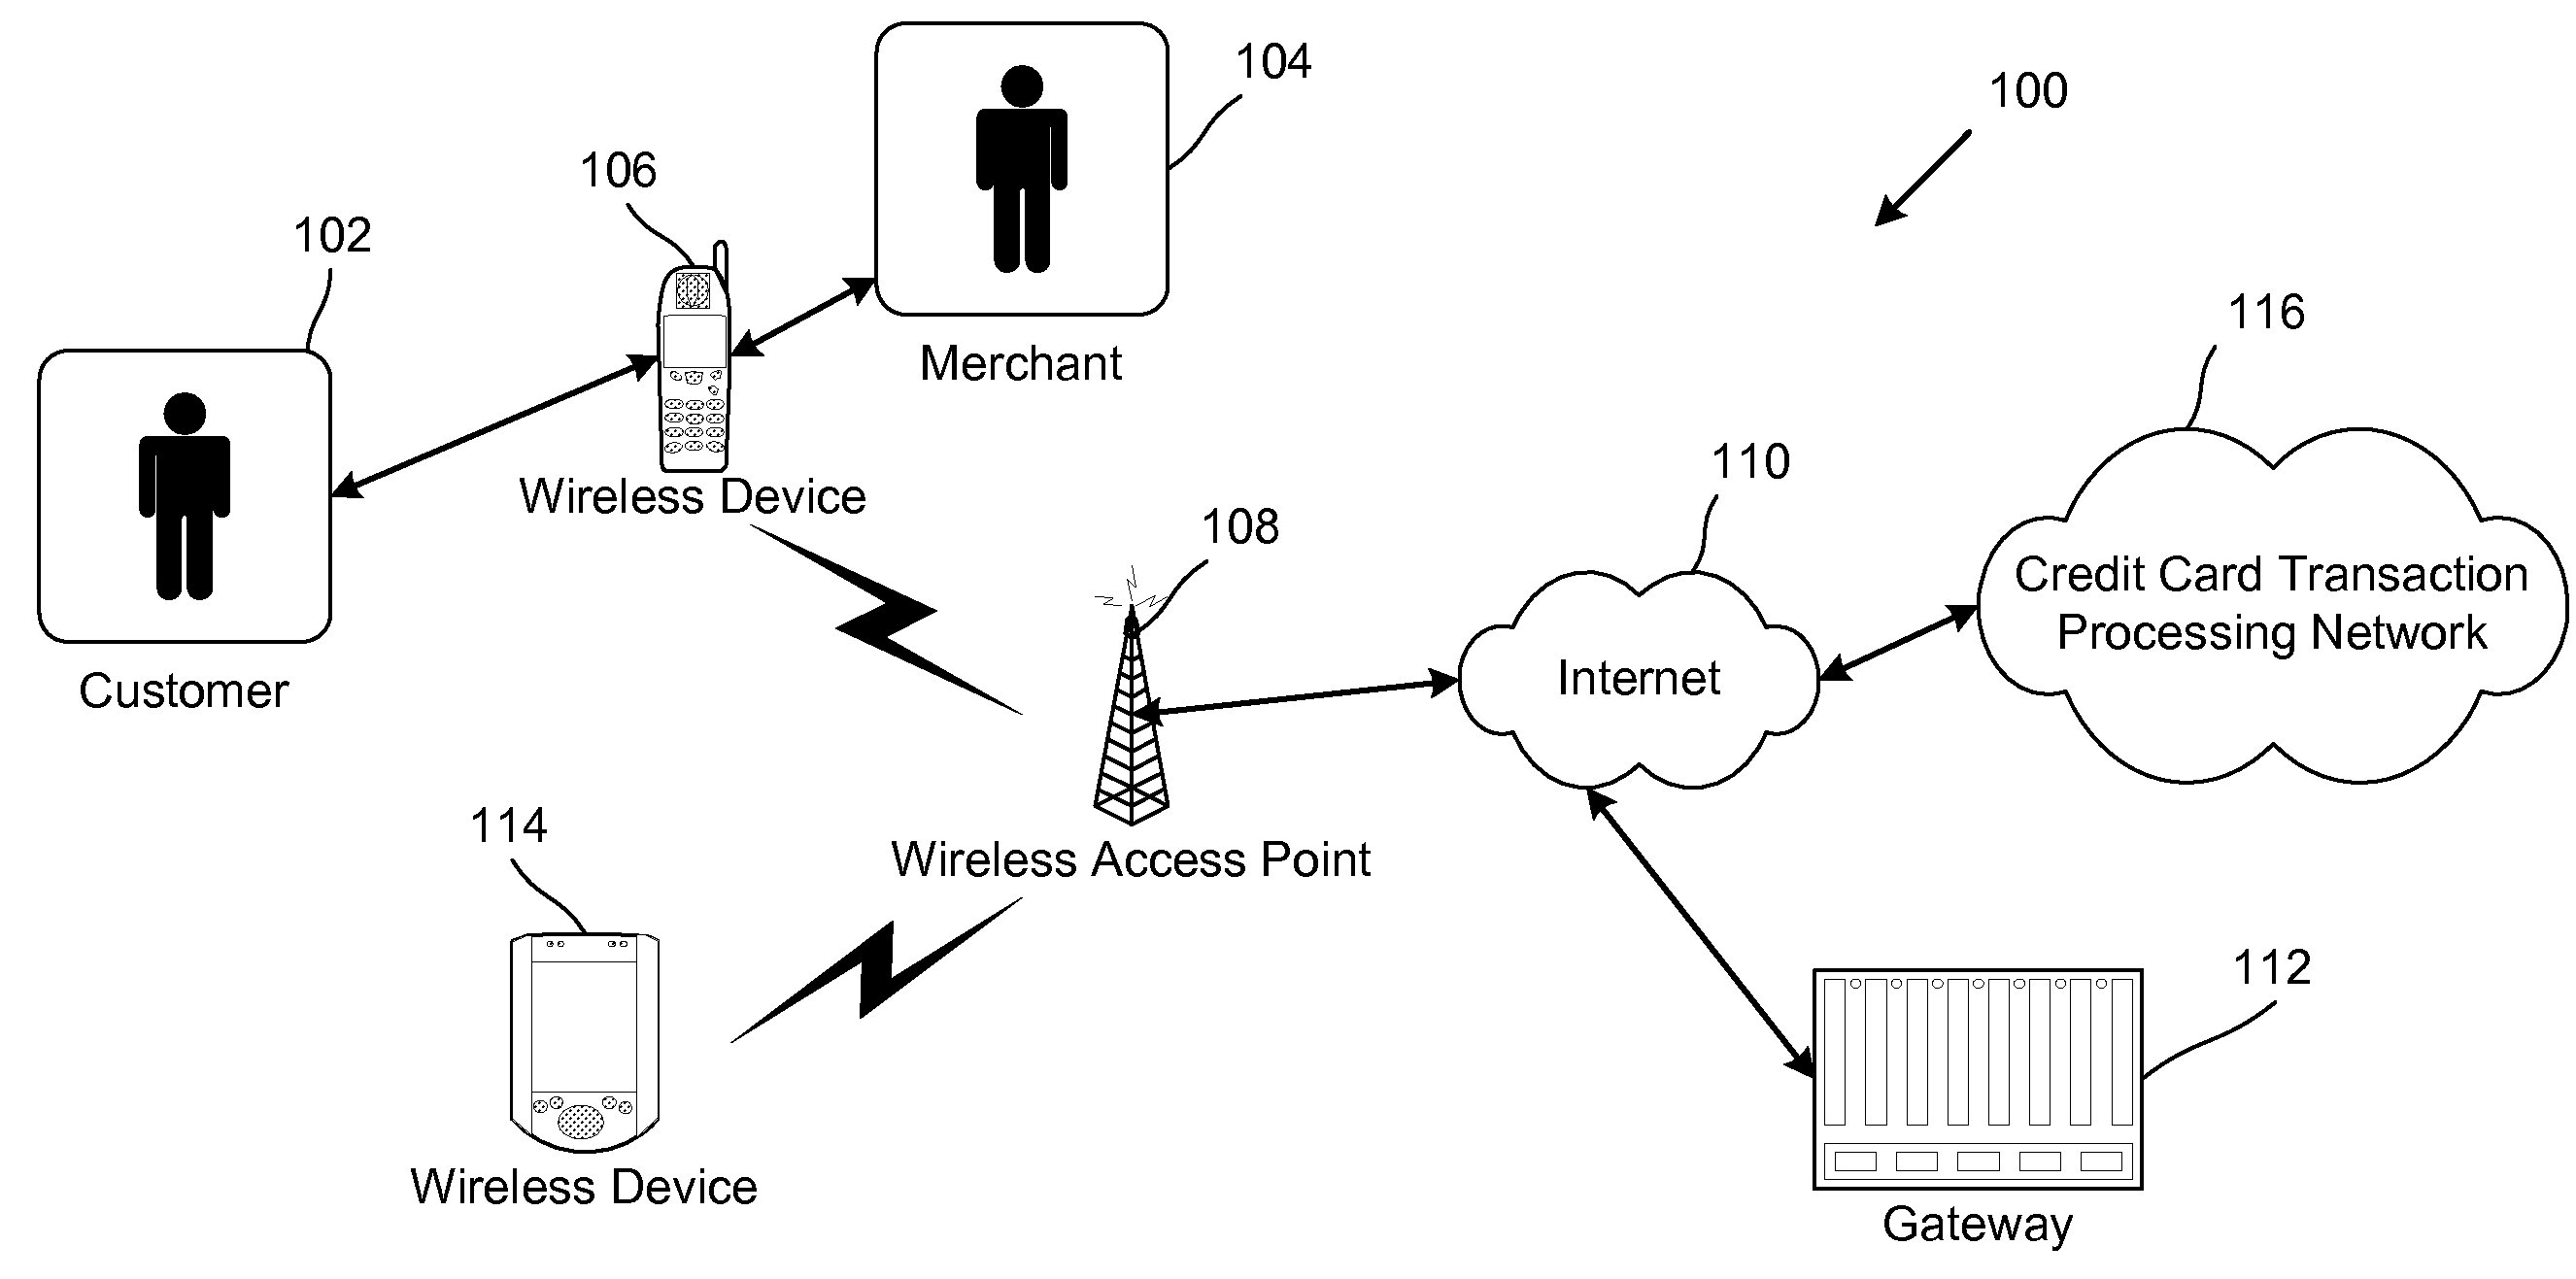 Virtual terminal payer authorization systems and methods